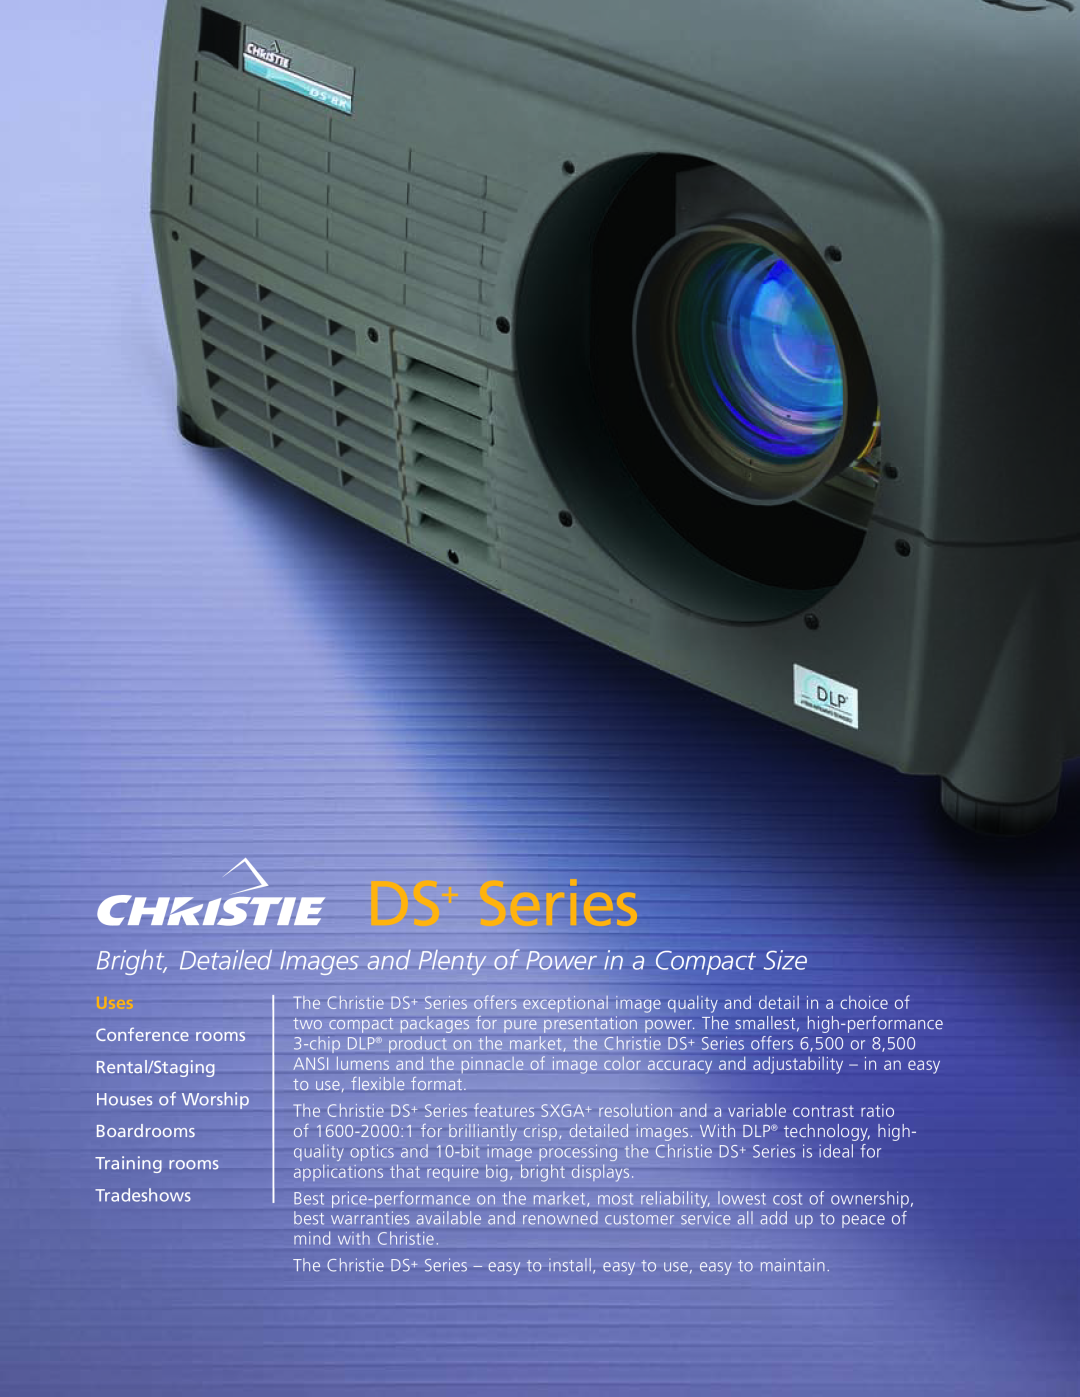 Christie Digital Systems DS+ Series manual Bright, Detailed Images and Plenty of Power in a Compact Size, Uses 